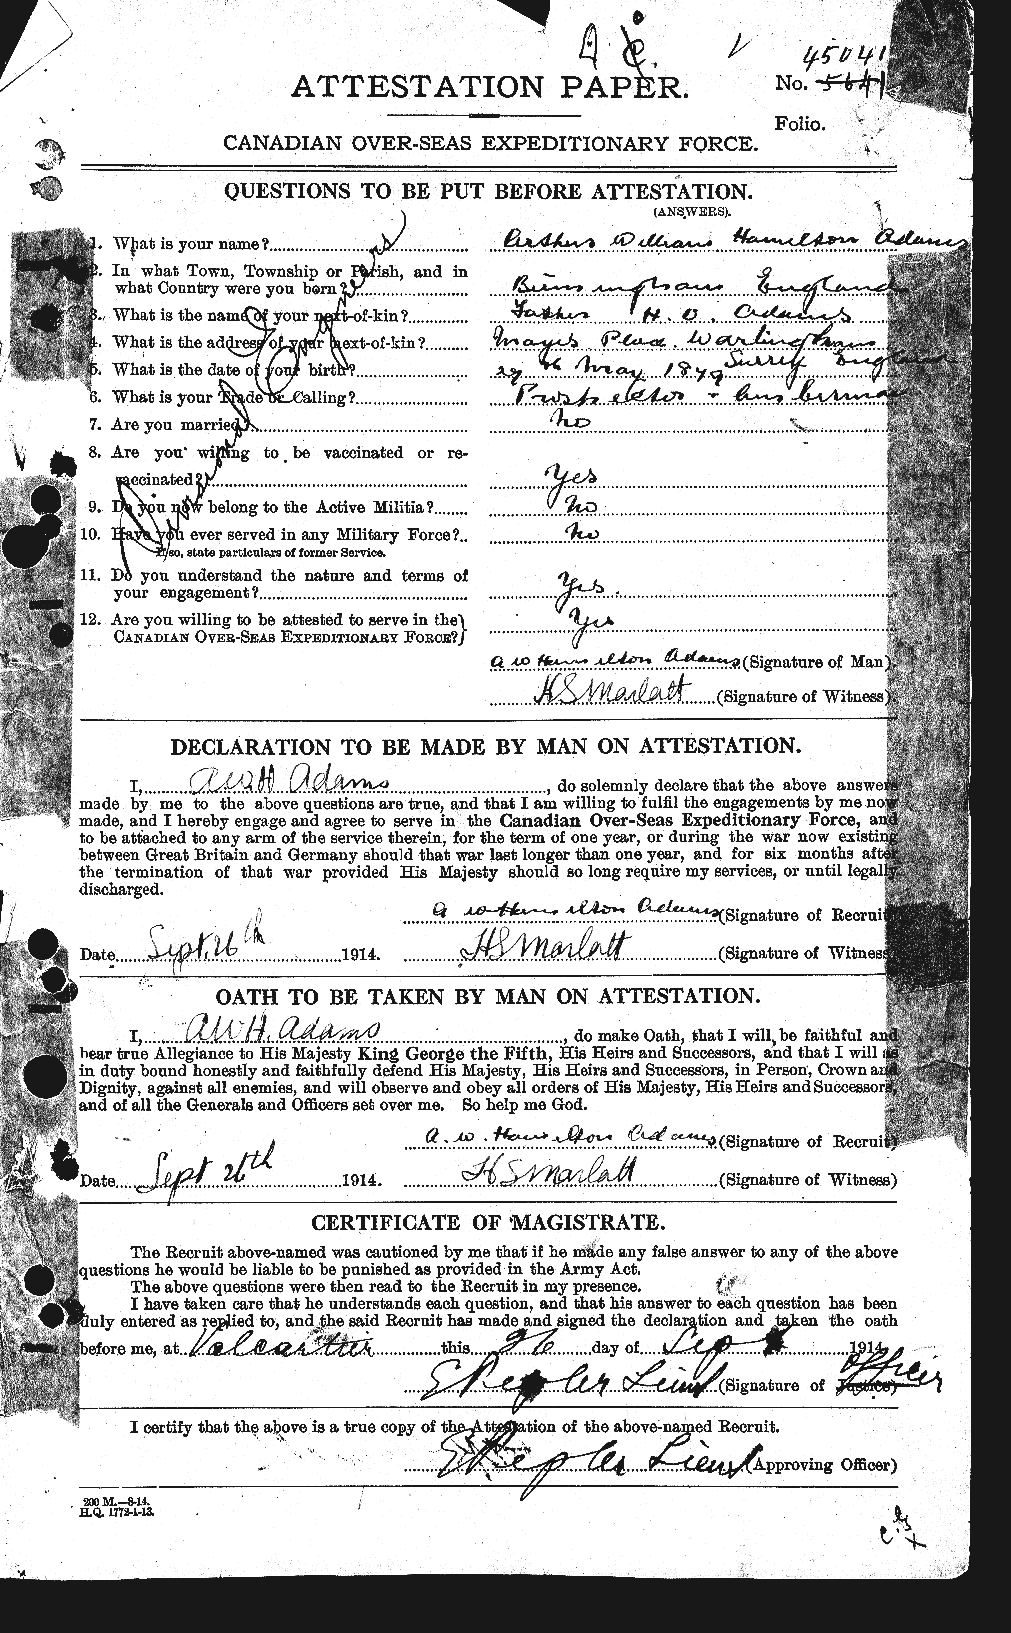 Personnel Records of the First World War - CEF 202030a